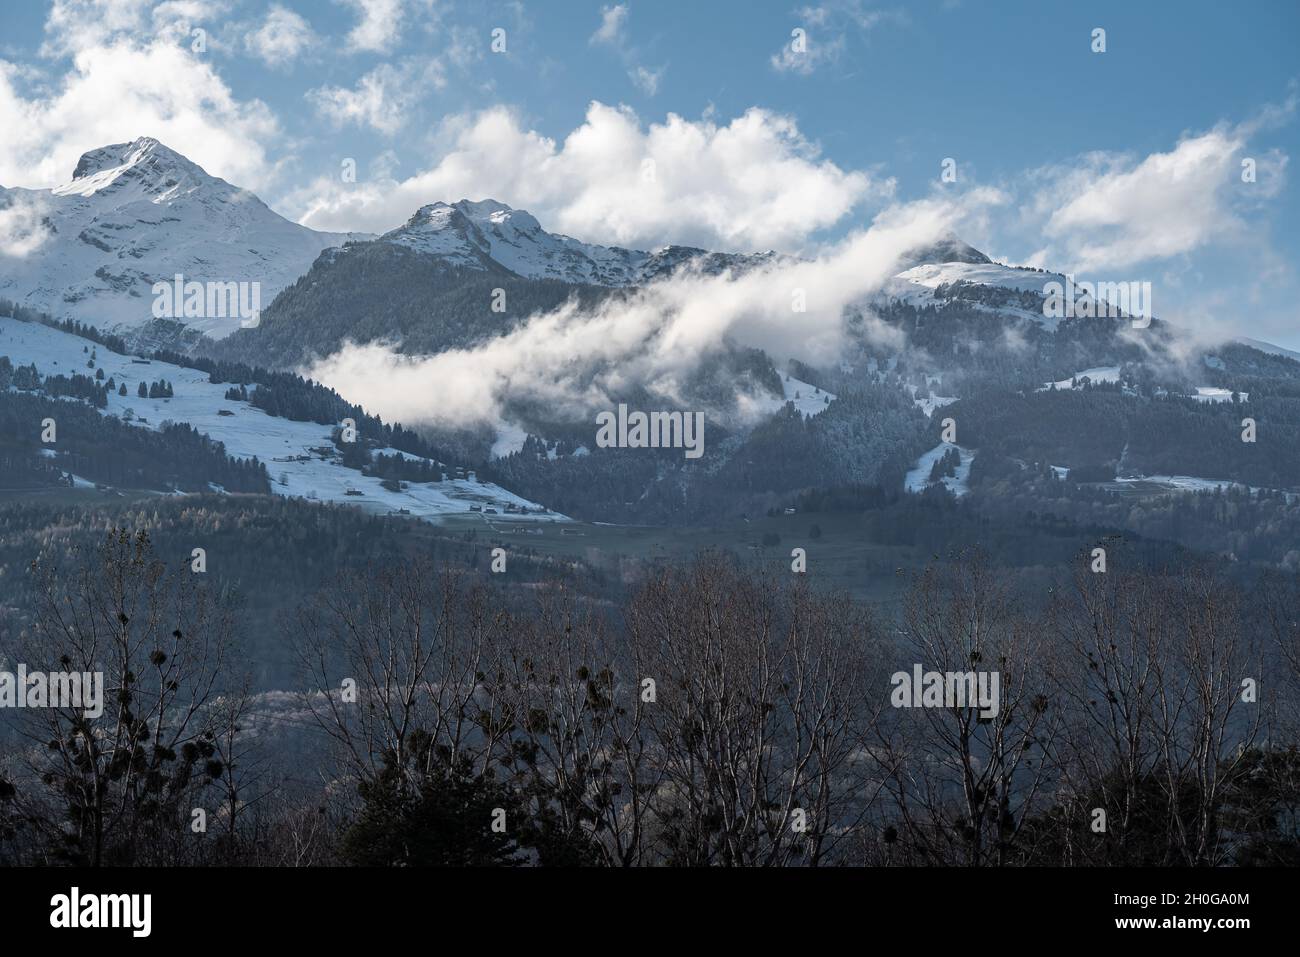 Appenzell Alps with Gamsberg and Fulfirst peaks view from Liechtenstein Stock Photo